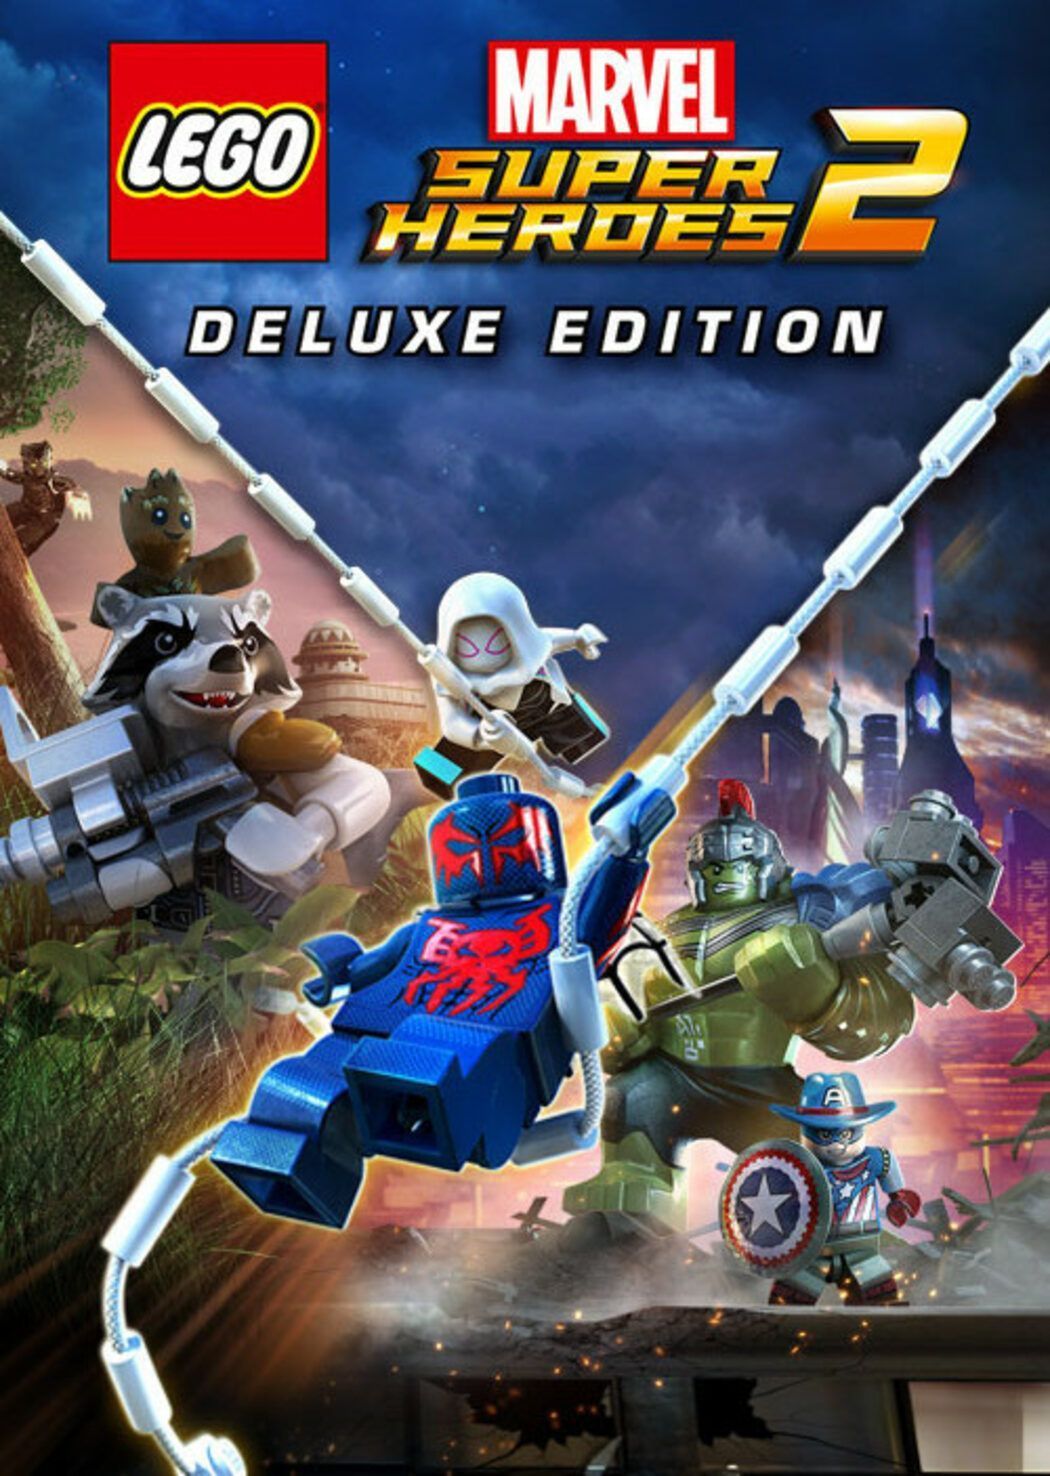 lego marvel super heroes 2. deluxe edition [pc